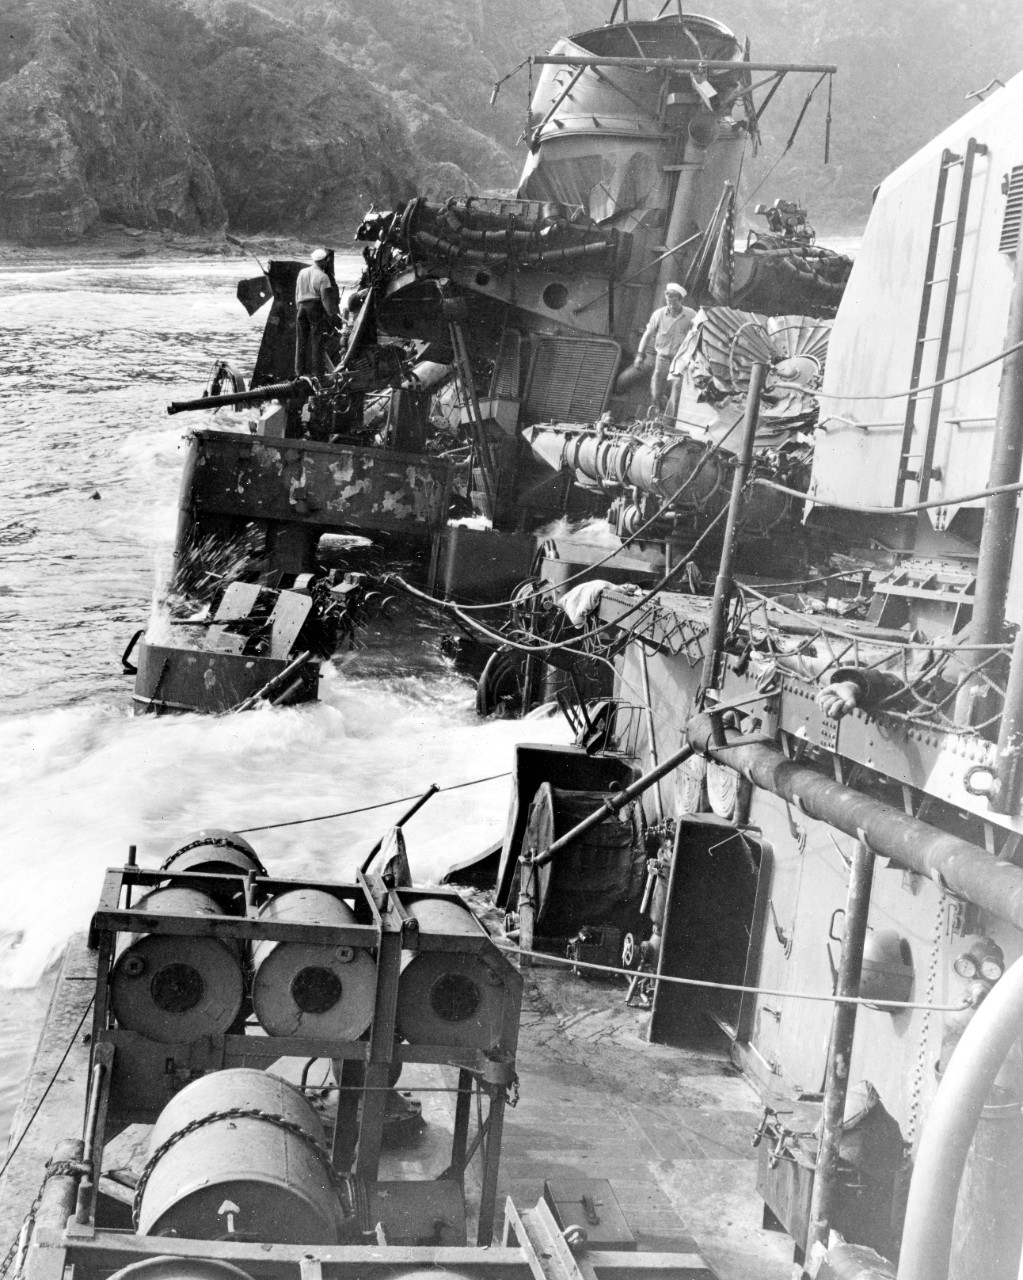 Taken by a member of the inspection party that visited Halligan’s wreck on 28 March 1945, this photo shows the ship down by the bow, the surf breaking over the main deck on the port side, while very little forward of the No. 2 stack (her steaming...